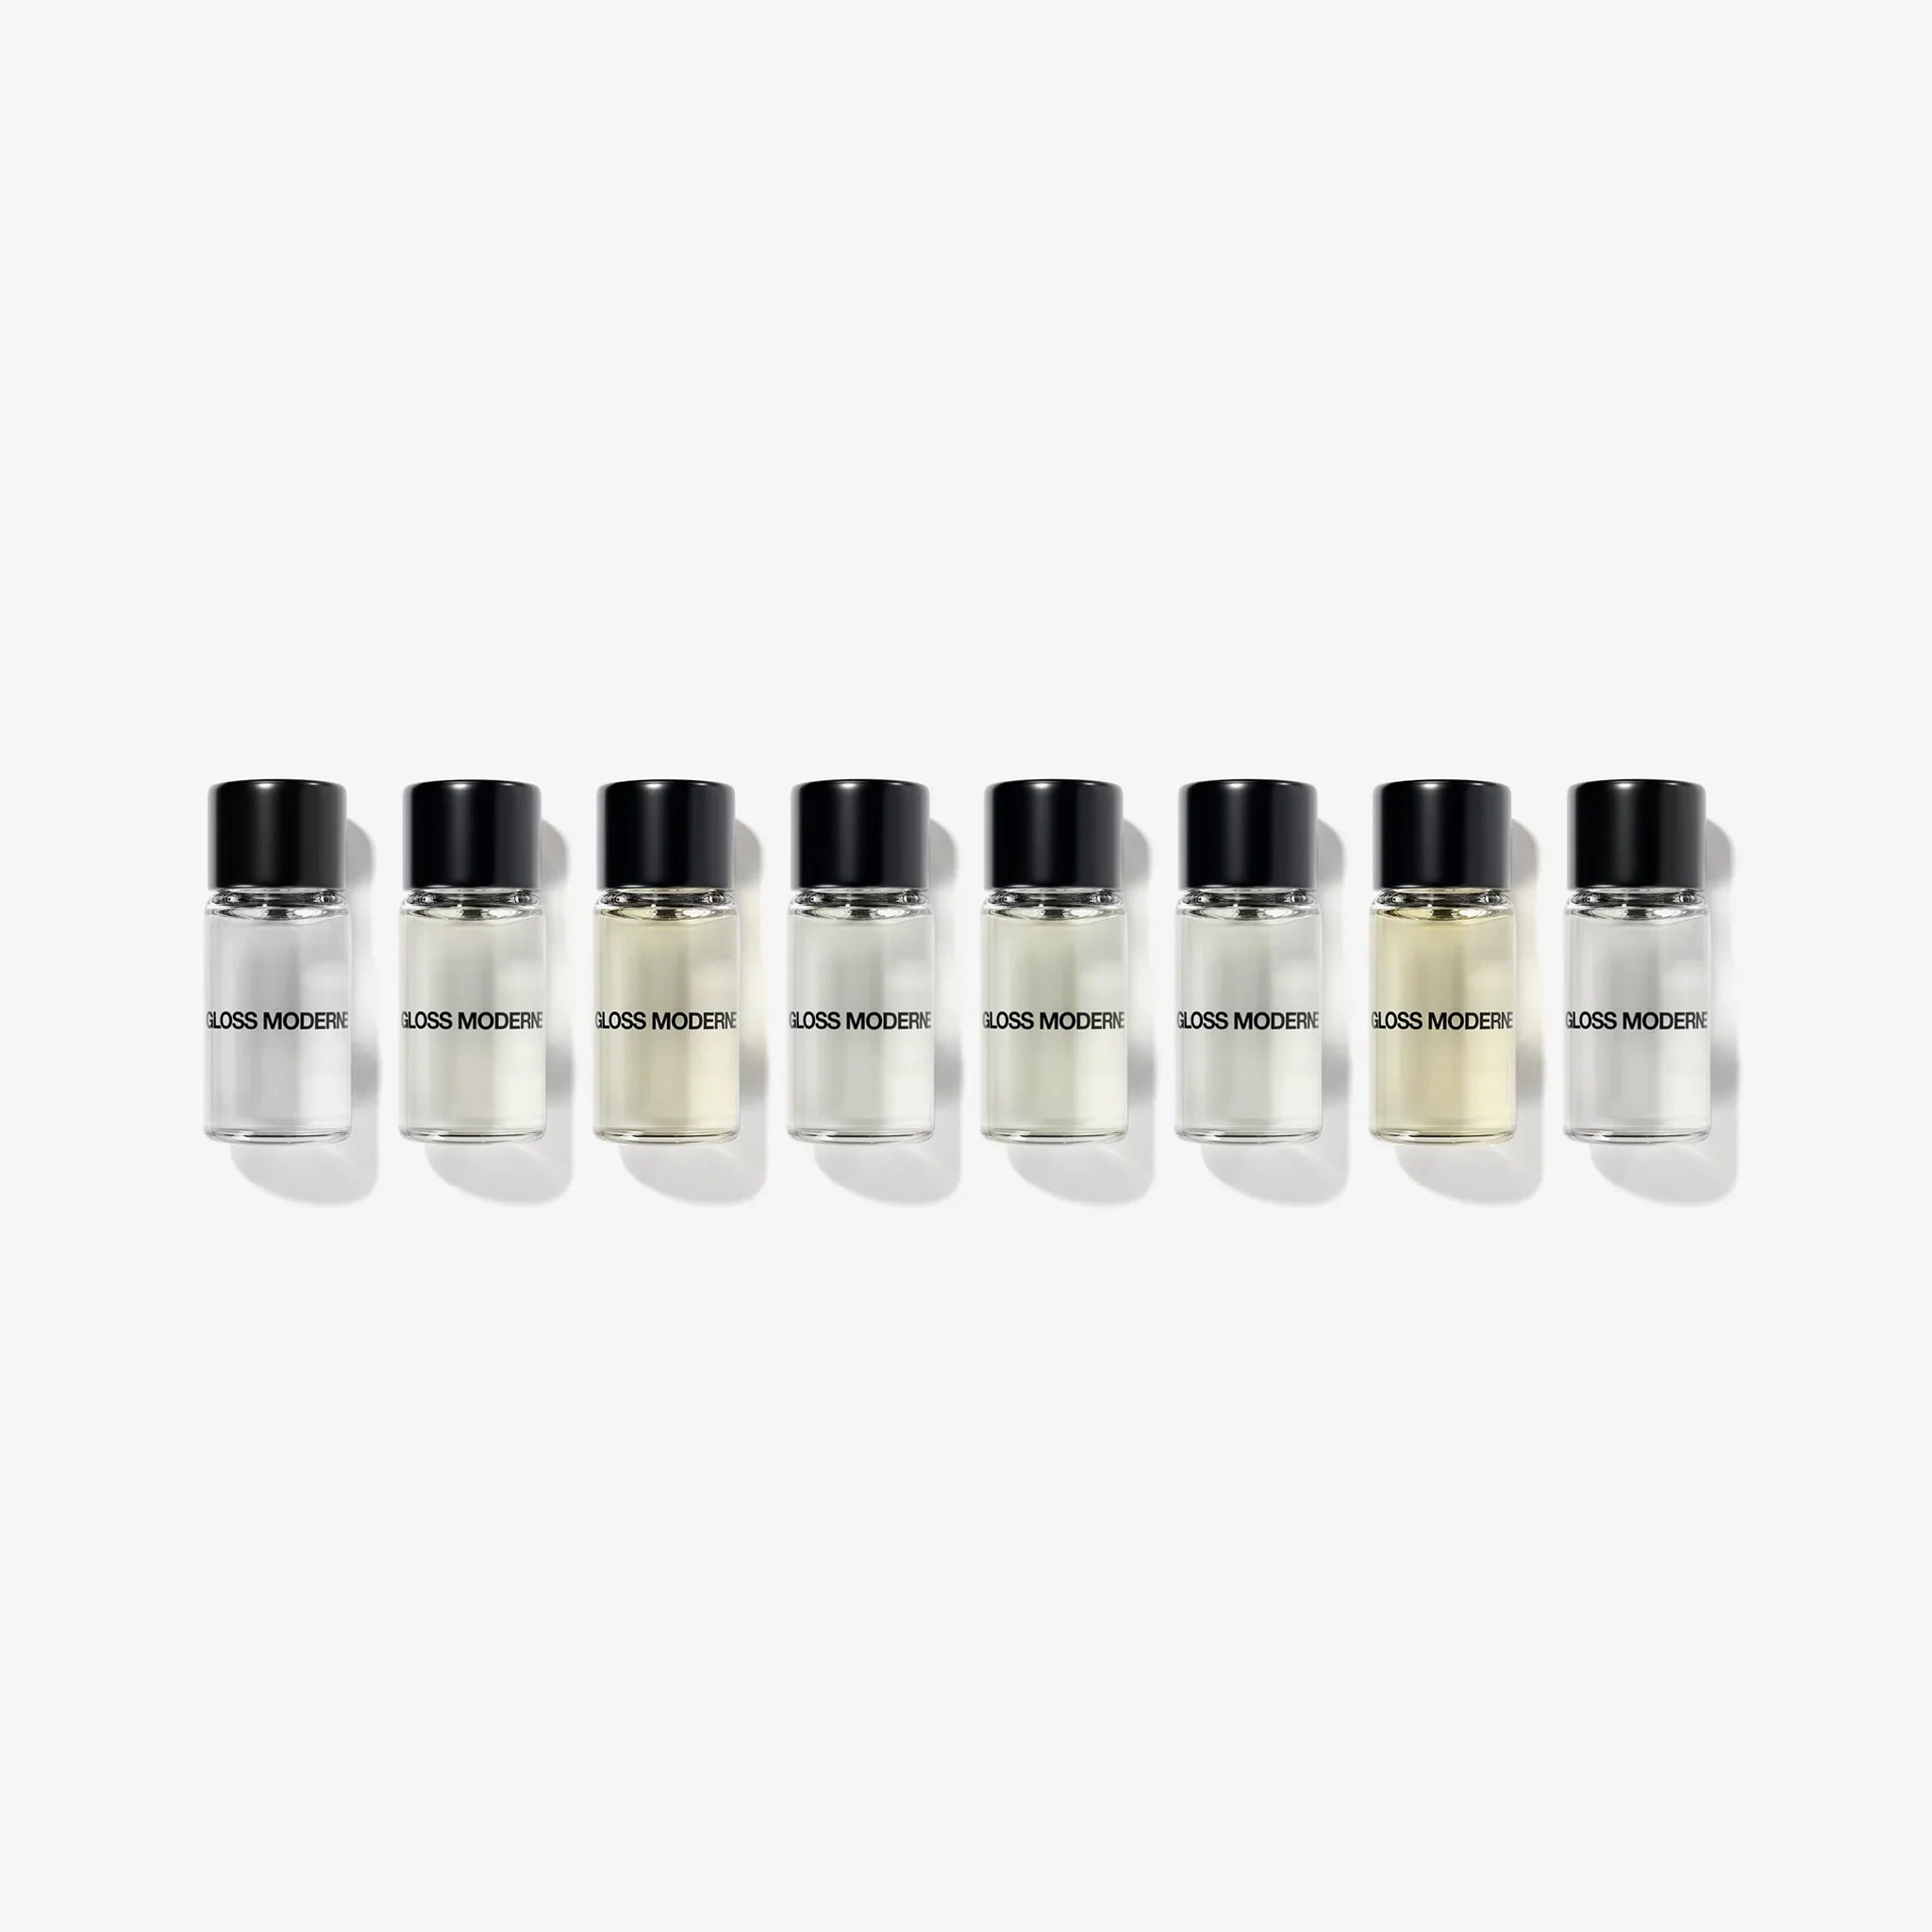 Clean Luxury Fragrance Discovery Set Vol. 4 - Perfume Oil